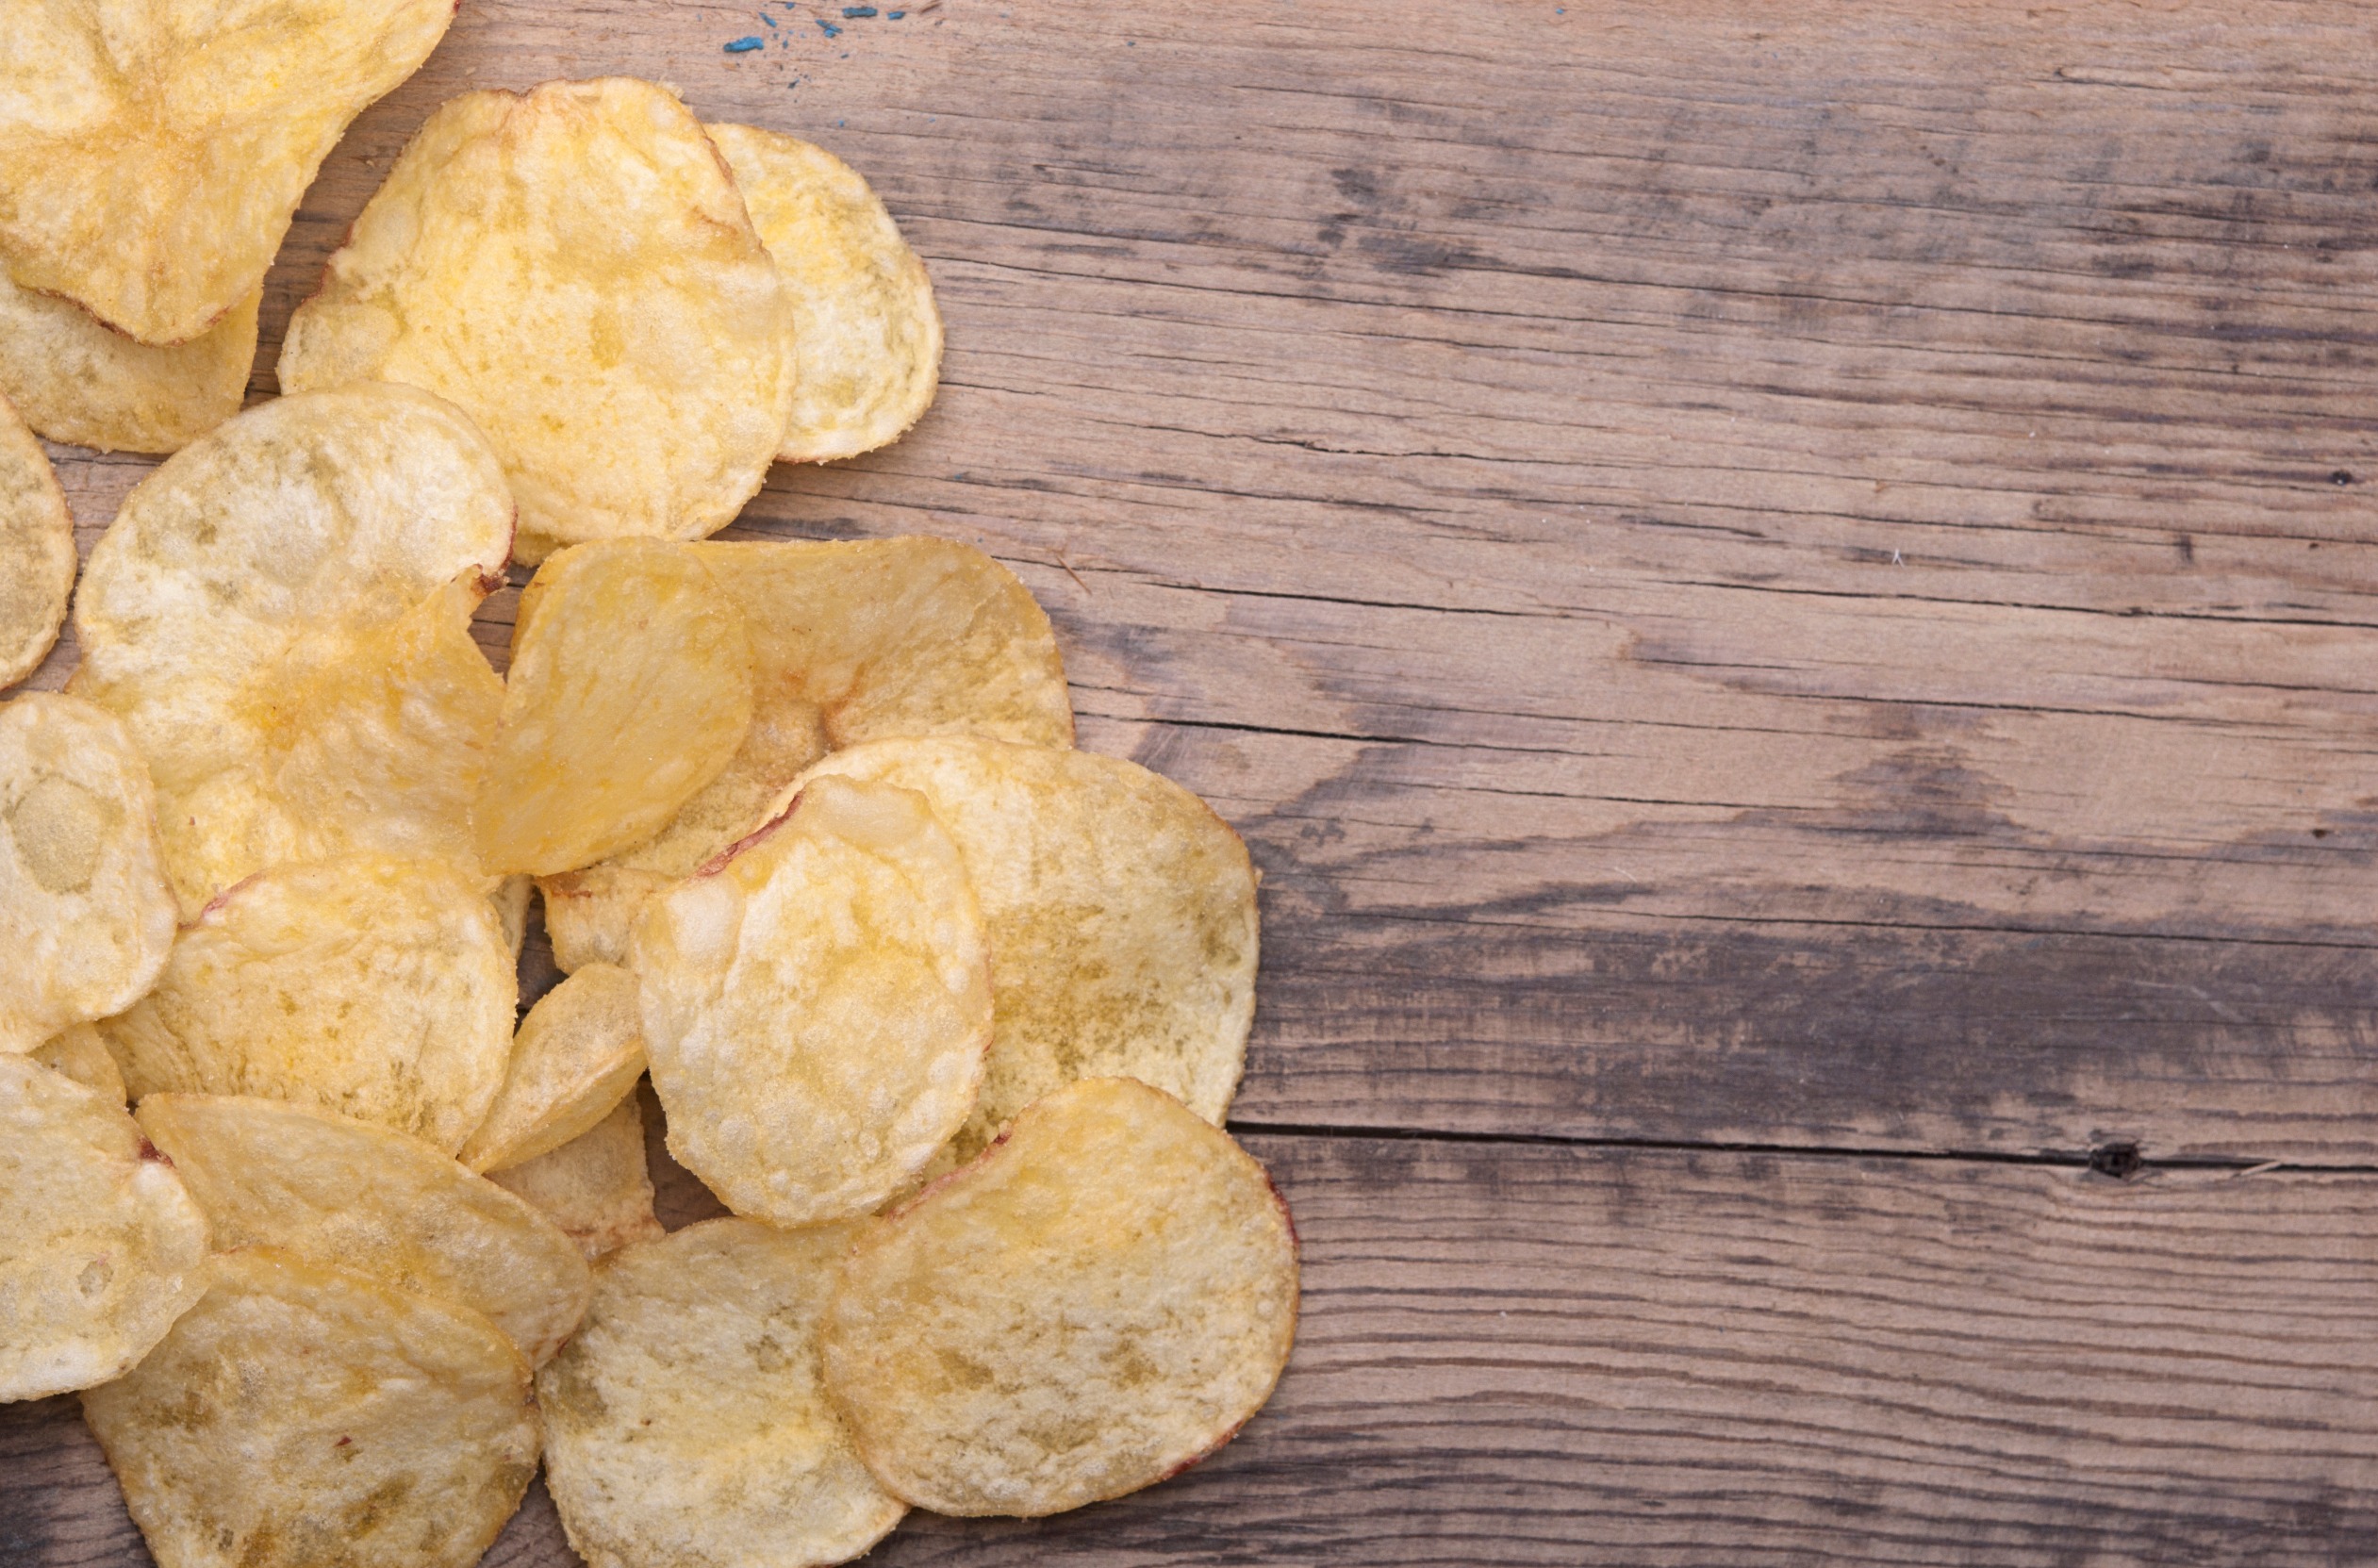 do healthy chips exist?